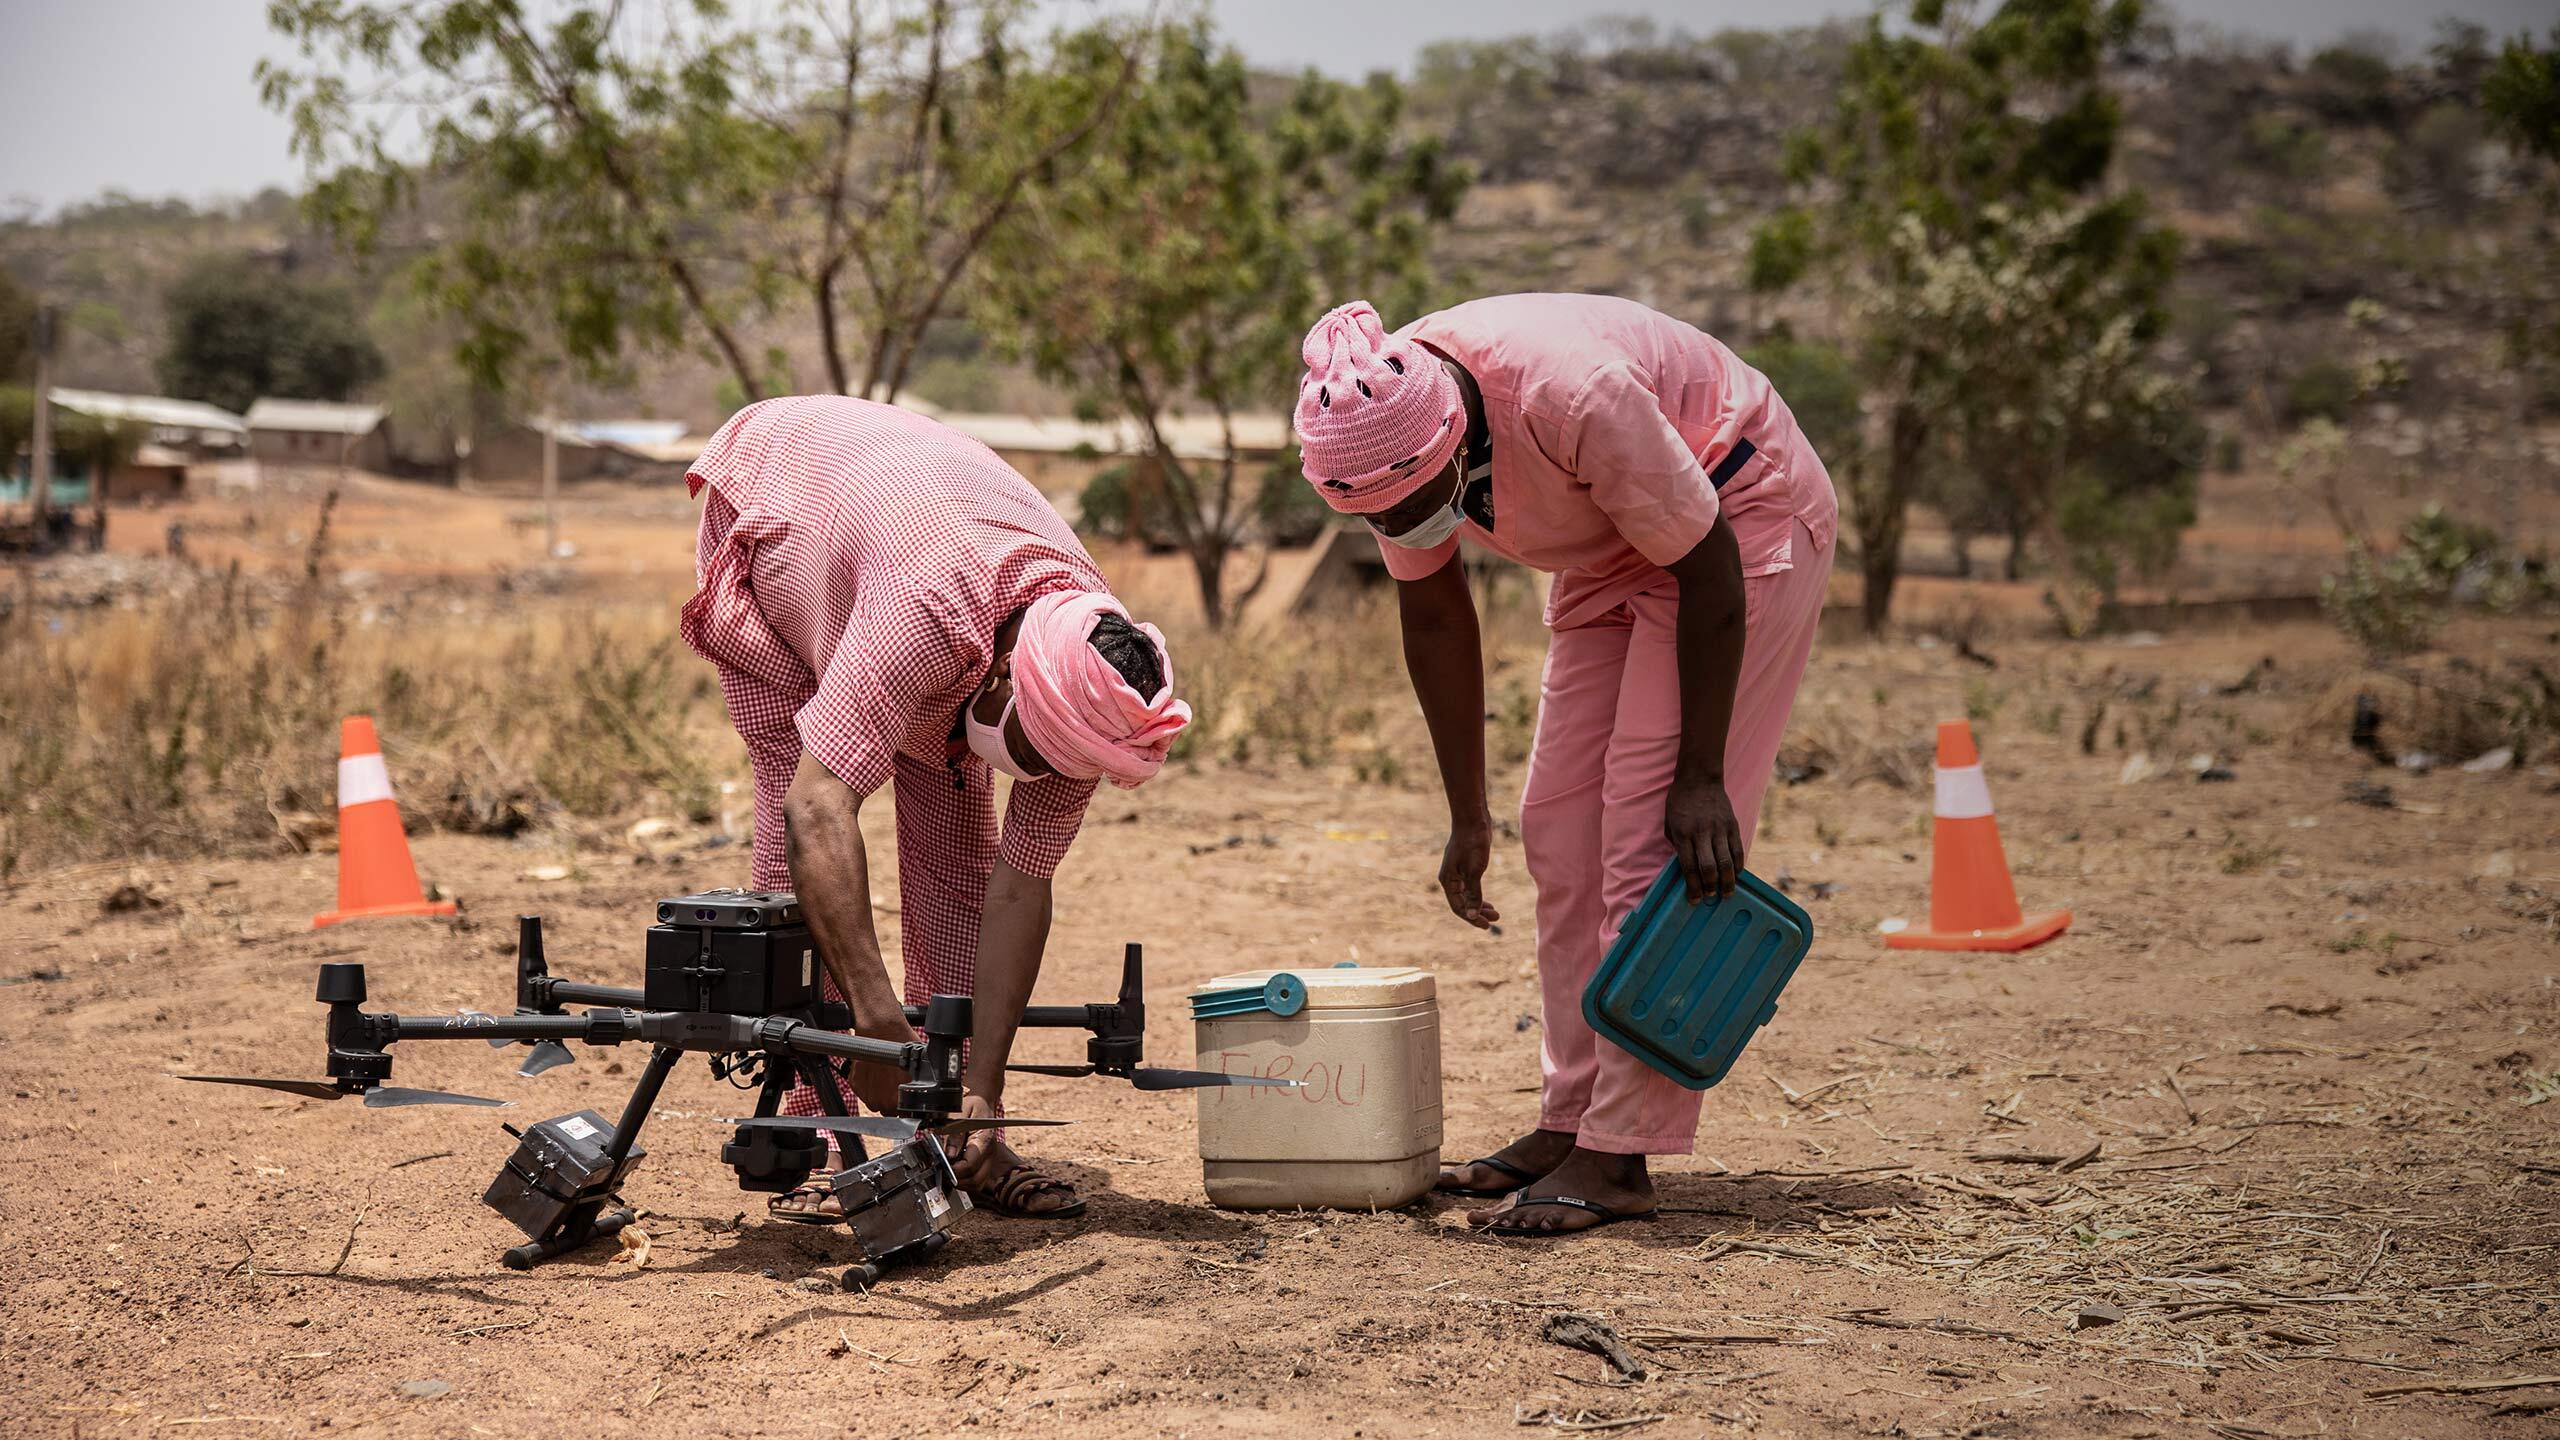 Health innovations, like the rapid development of COVID-19 vaccines, also proved essential in 2021. Here, in Benin, midwives offload medical supplies from a drone in the Firou maternity health centre, part of a pilot programme to deliver vital medicines and blood to isolated areas.